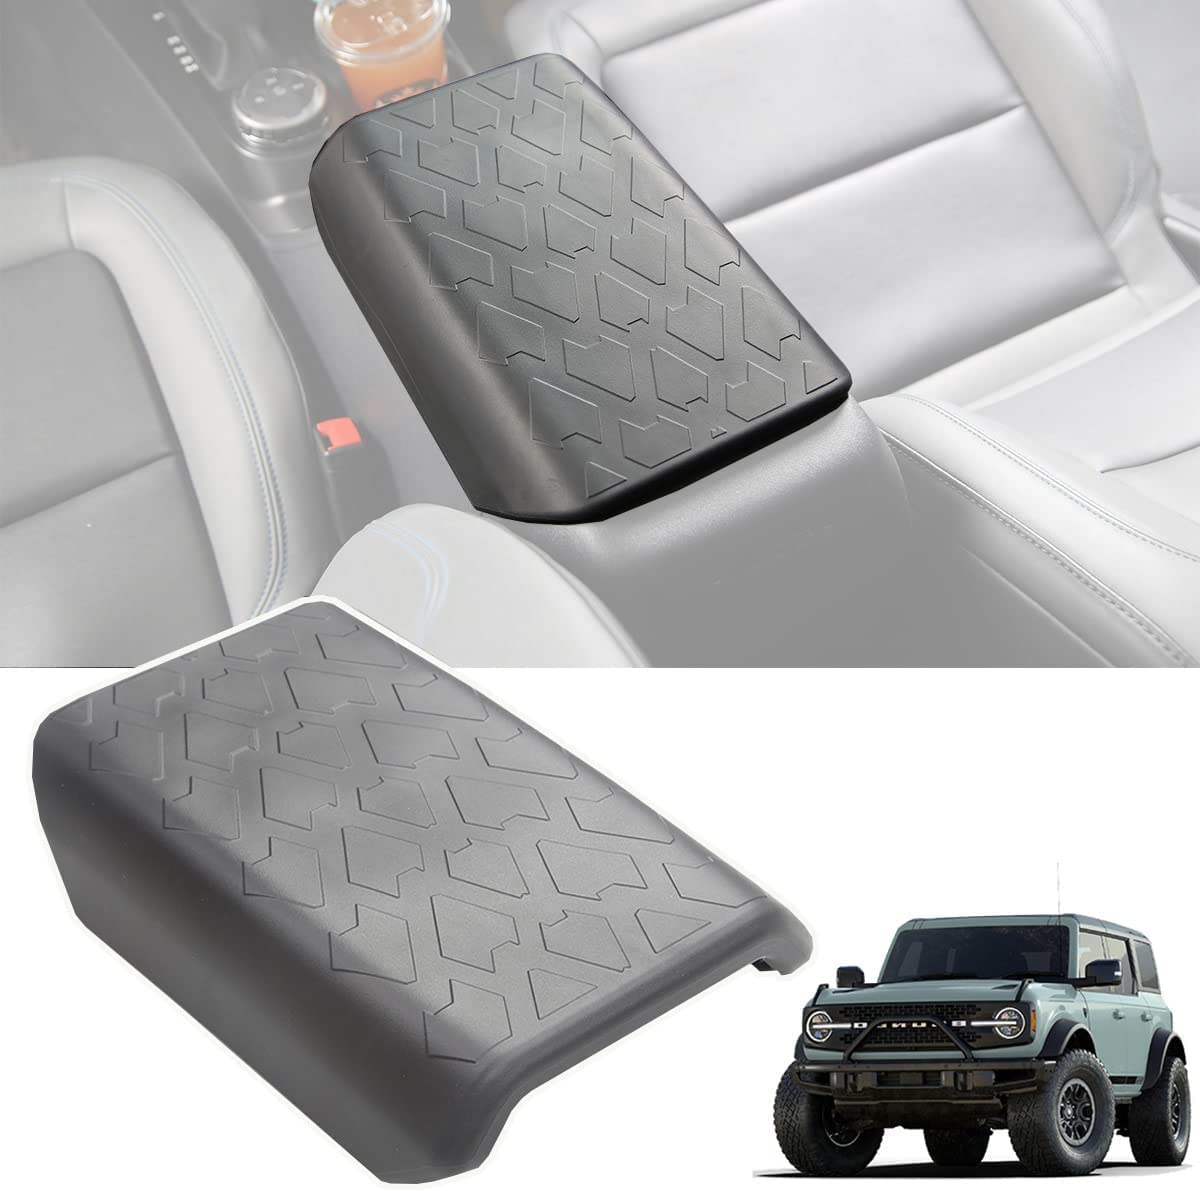 TPE Waterproof Anti-Scratch Console Center Armrest Protector Pad Cover for 2021 2022 Ford Bronco Accessories 2/4 Door